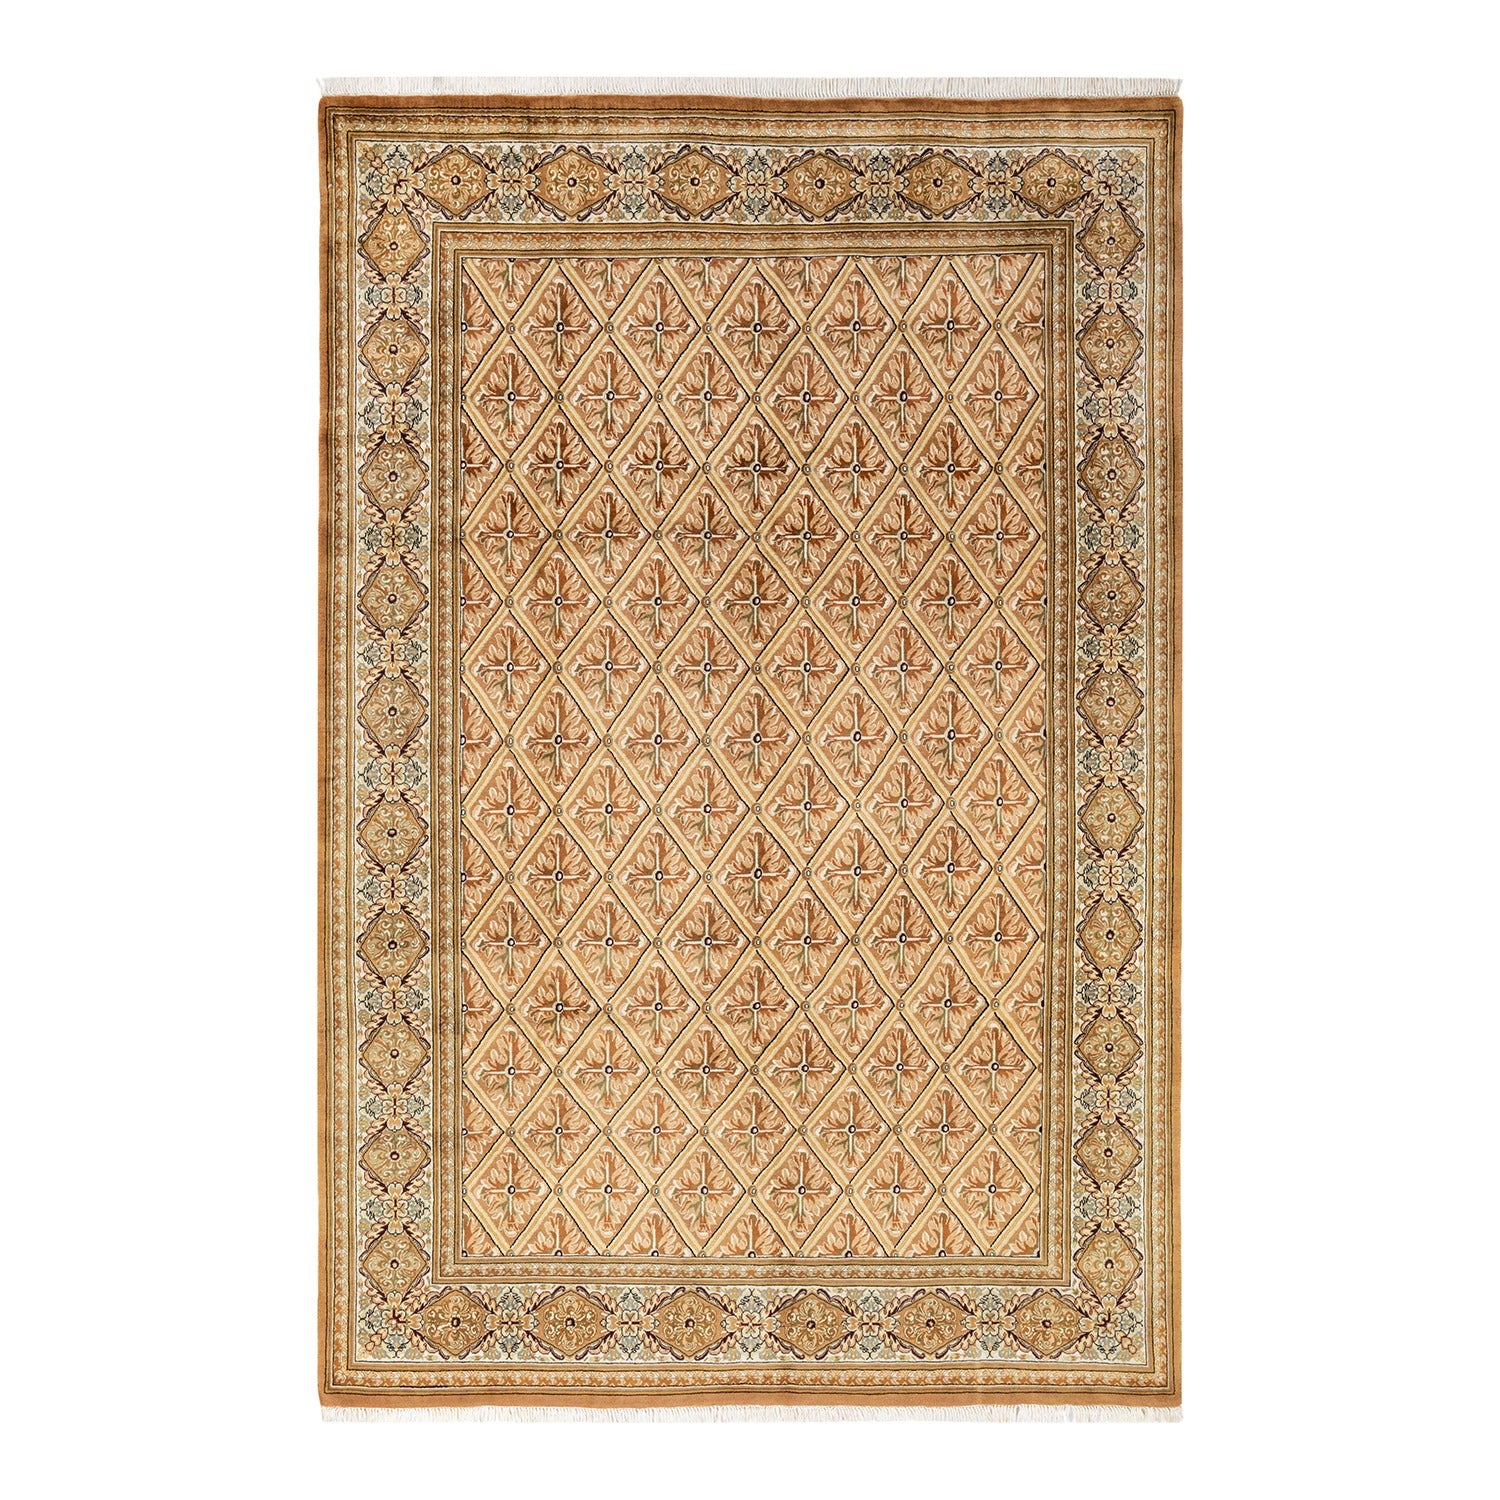 Ornate handcrafted rug with intricate geometric pattern and floral motifs